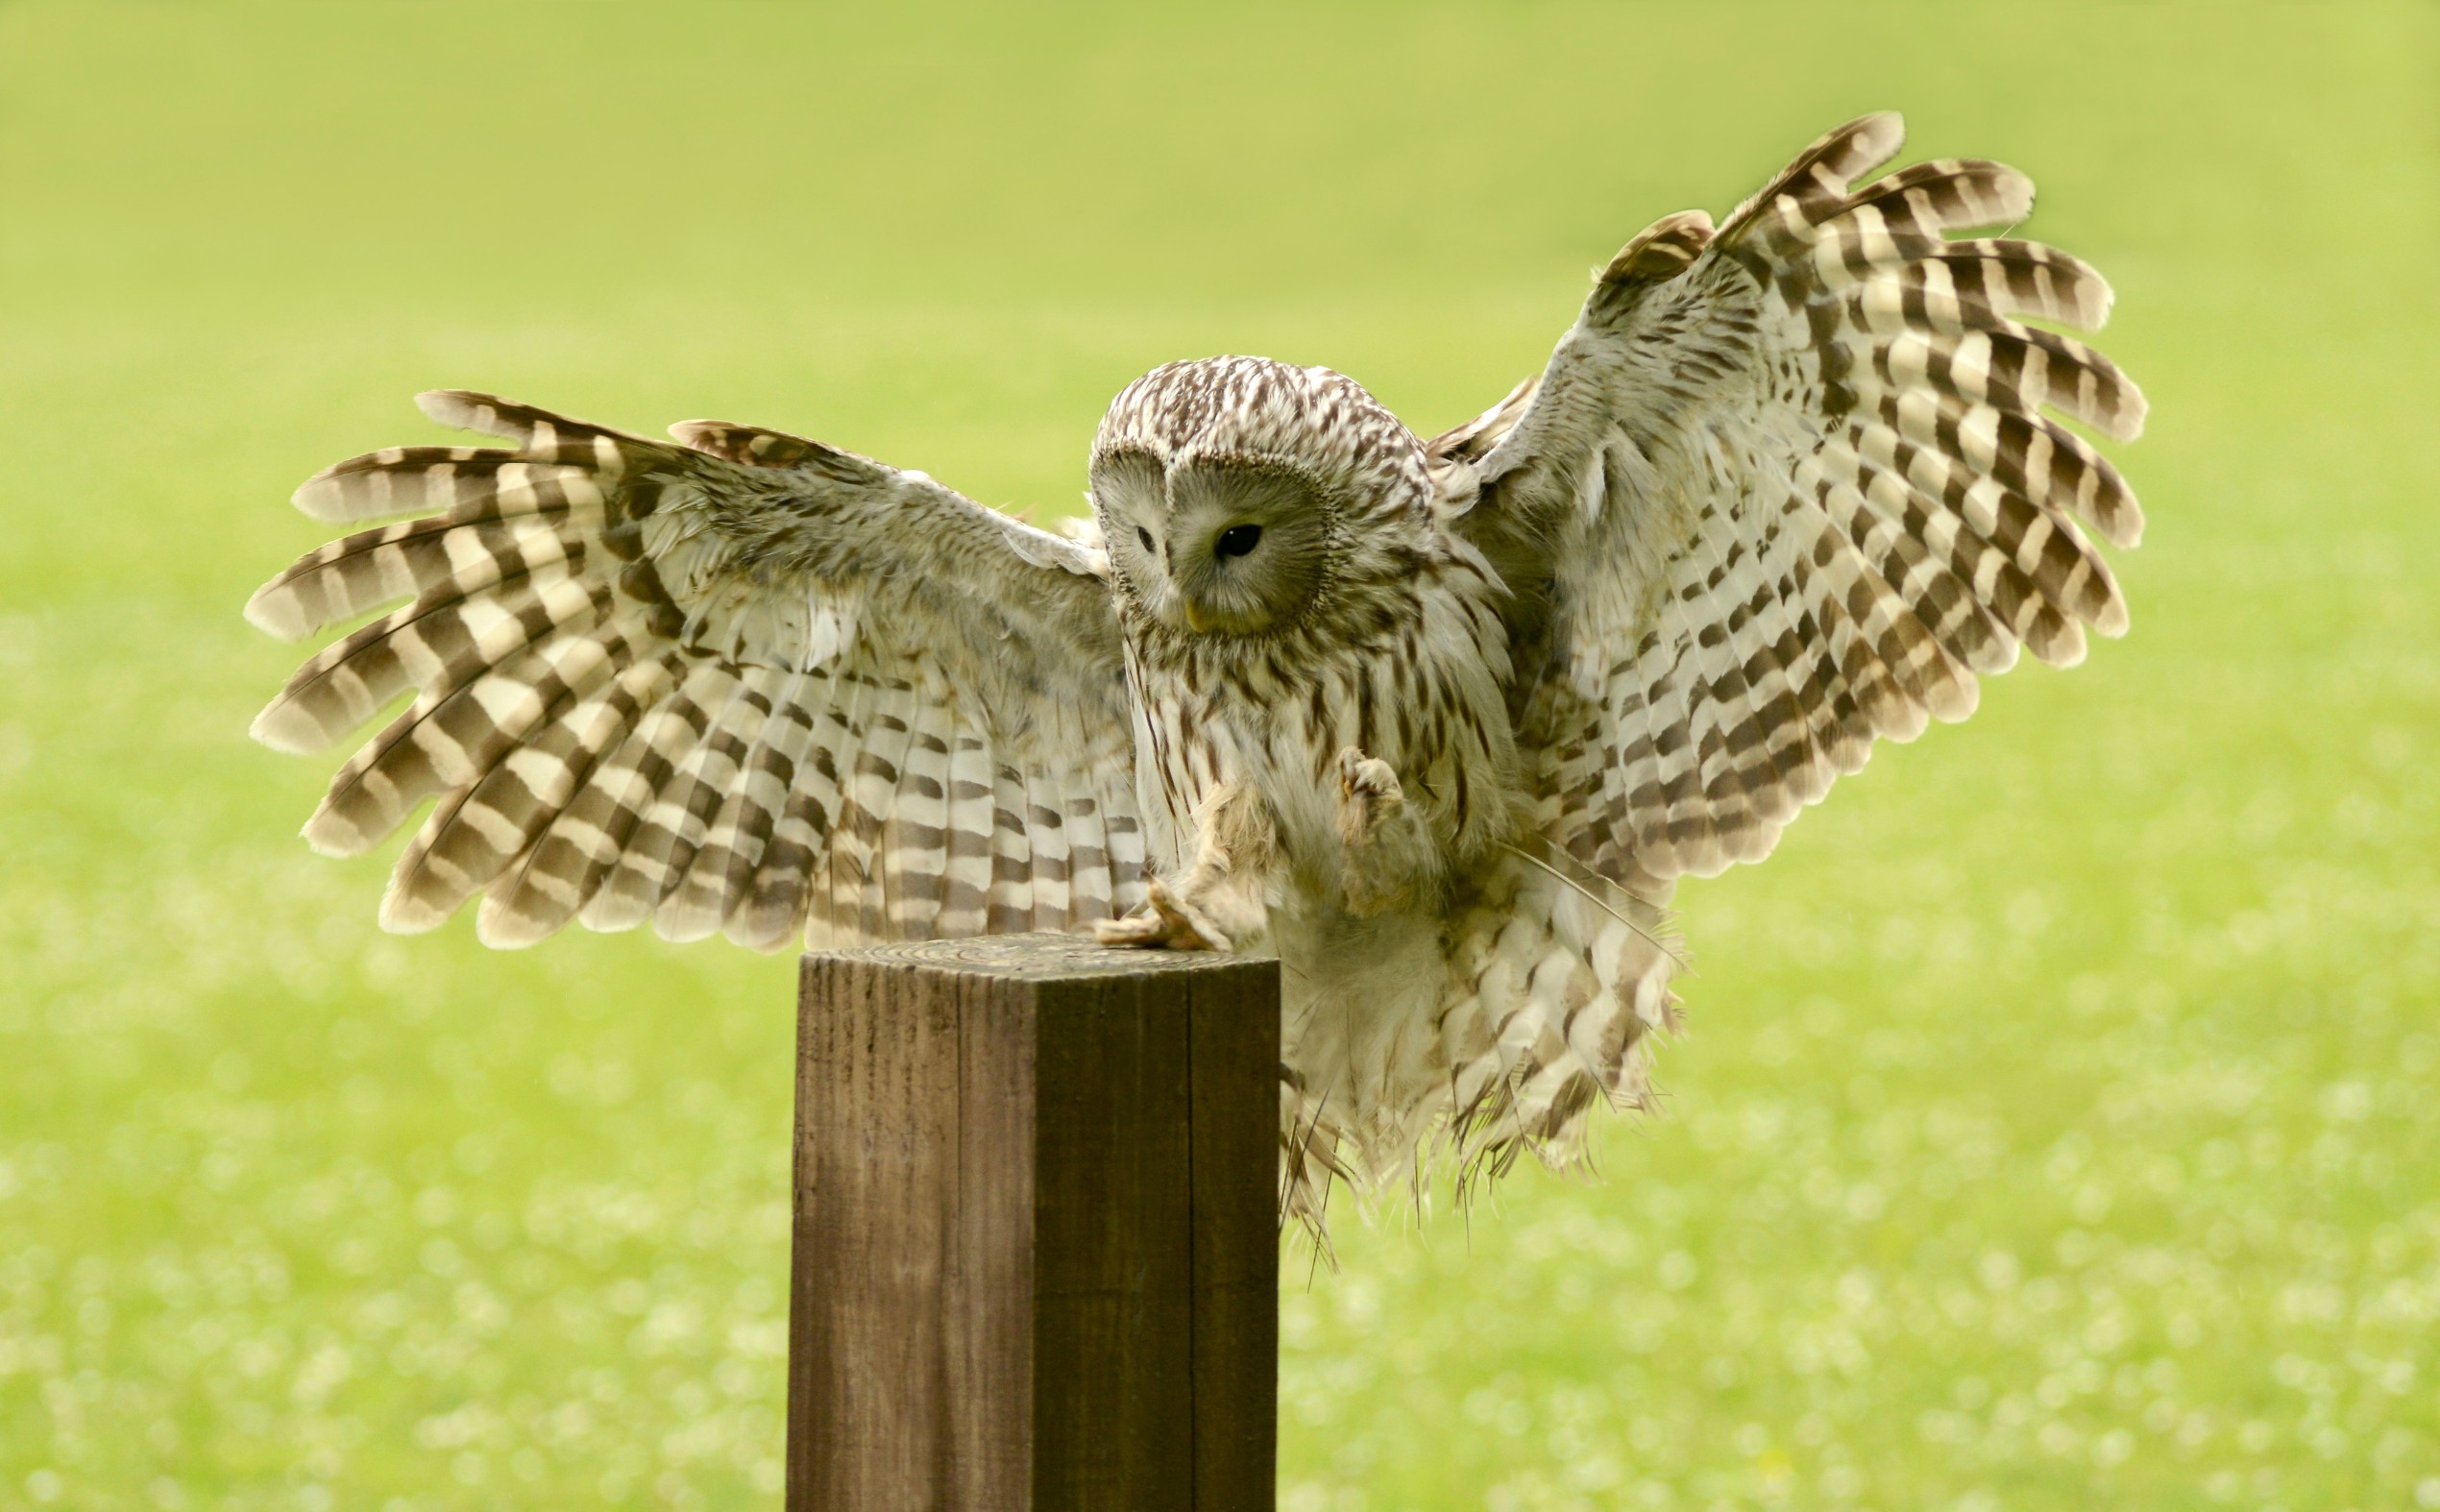 Editorial use only  
Ural owl (Strix uralensis) in flight at the Fenland Falconry Centre, Cambridgeshire, UK., Image: 385293431, License: Rights-managed, Restrictions: , Model Release: no, Credit line: NIGEL DOWNER / Sciencephoto / Profimedia